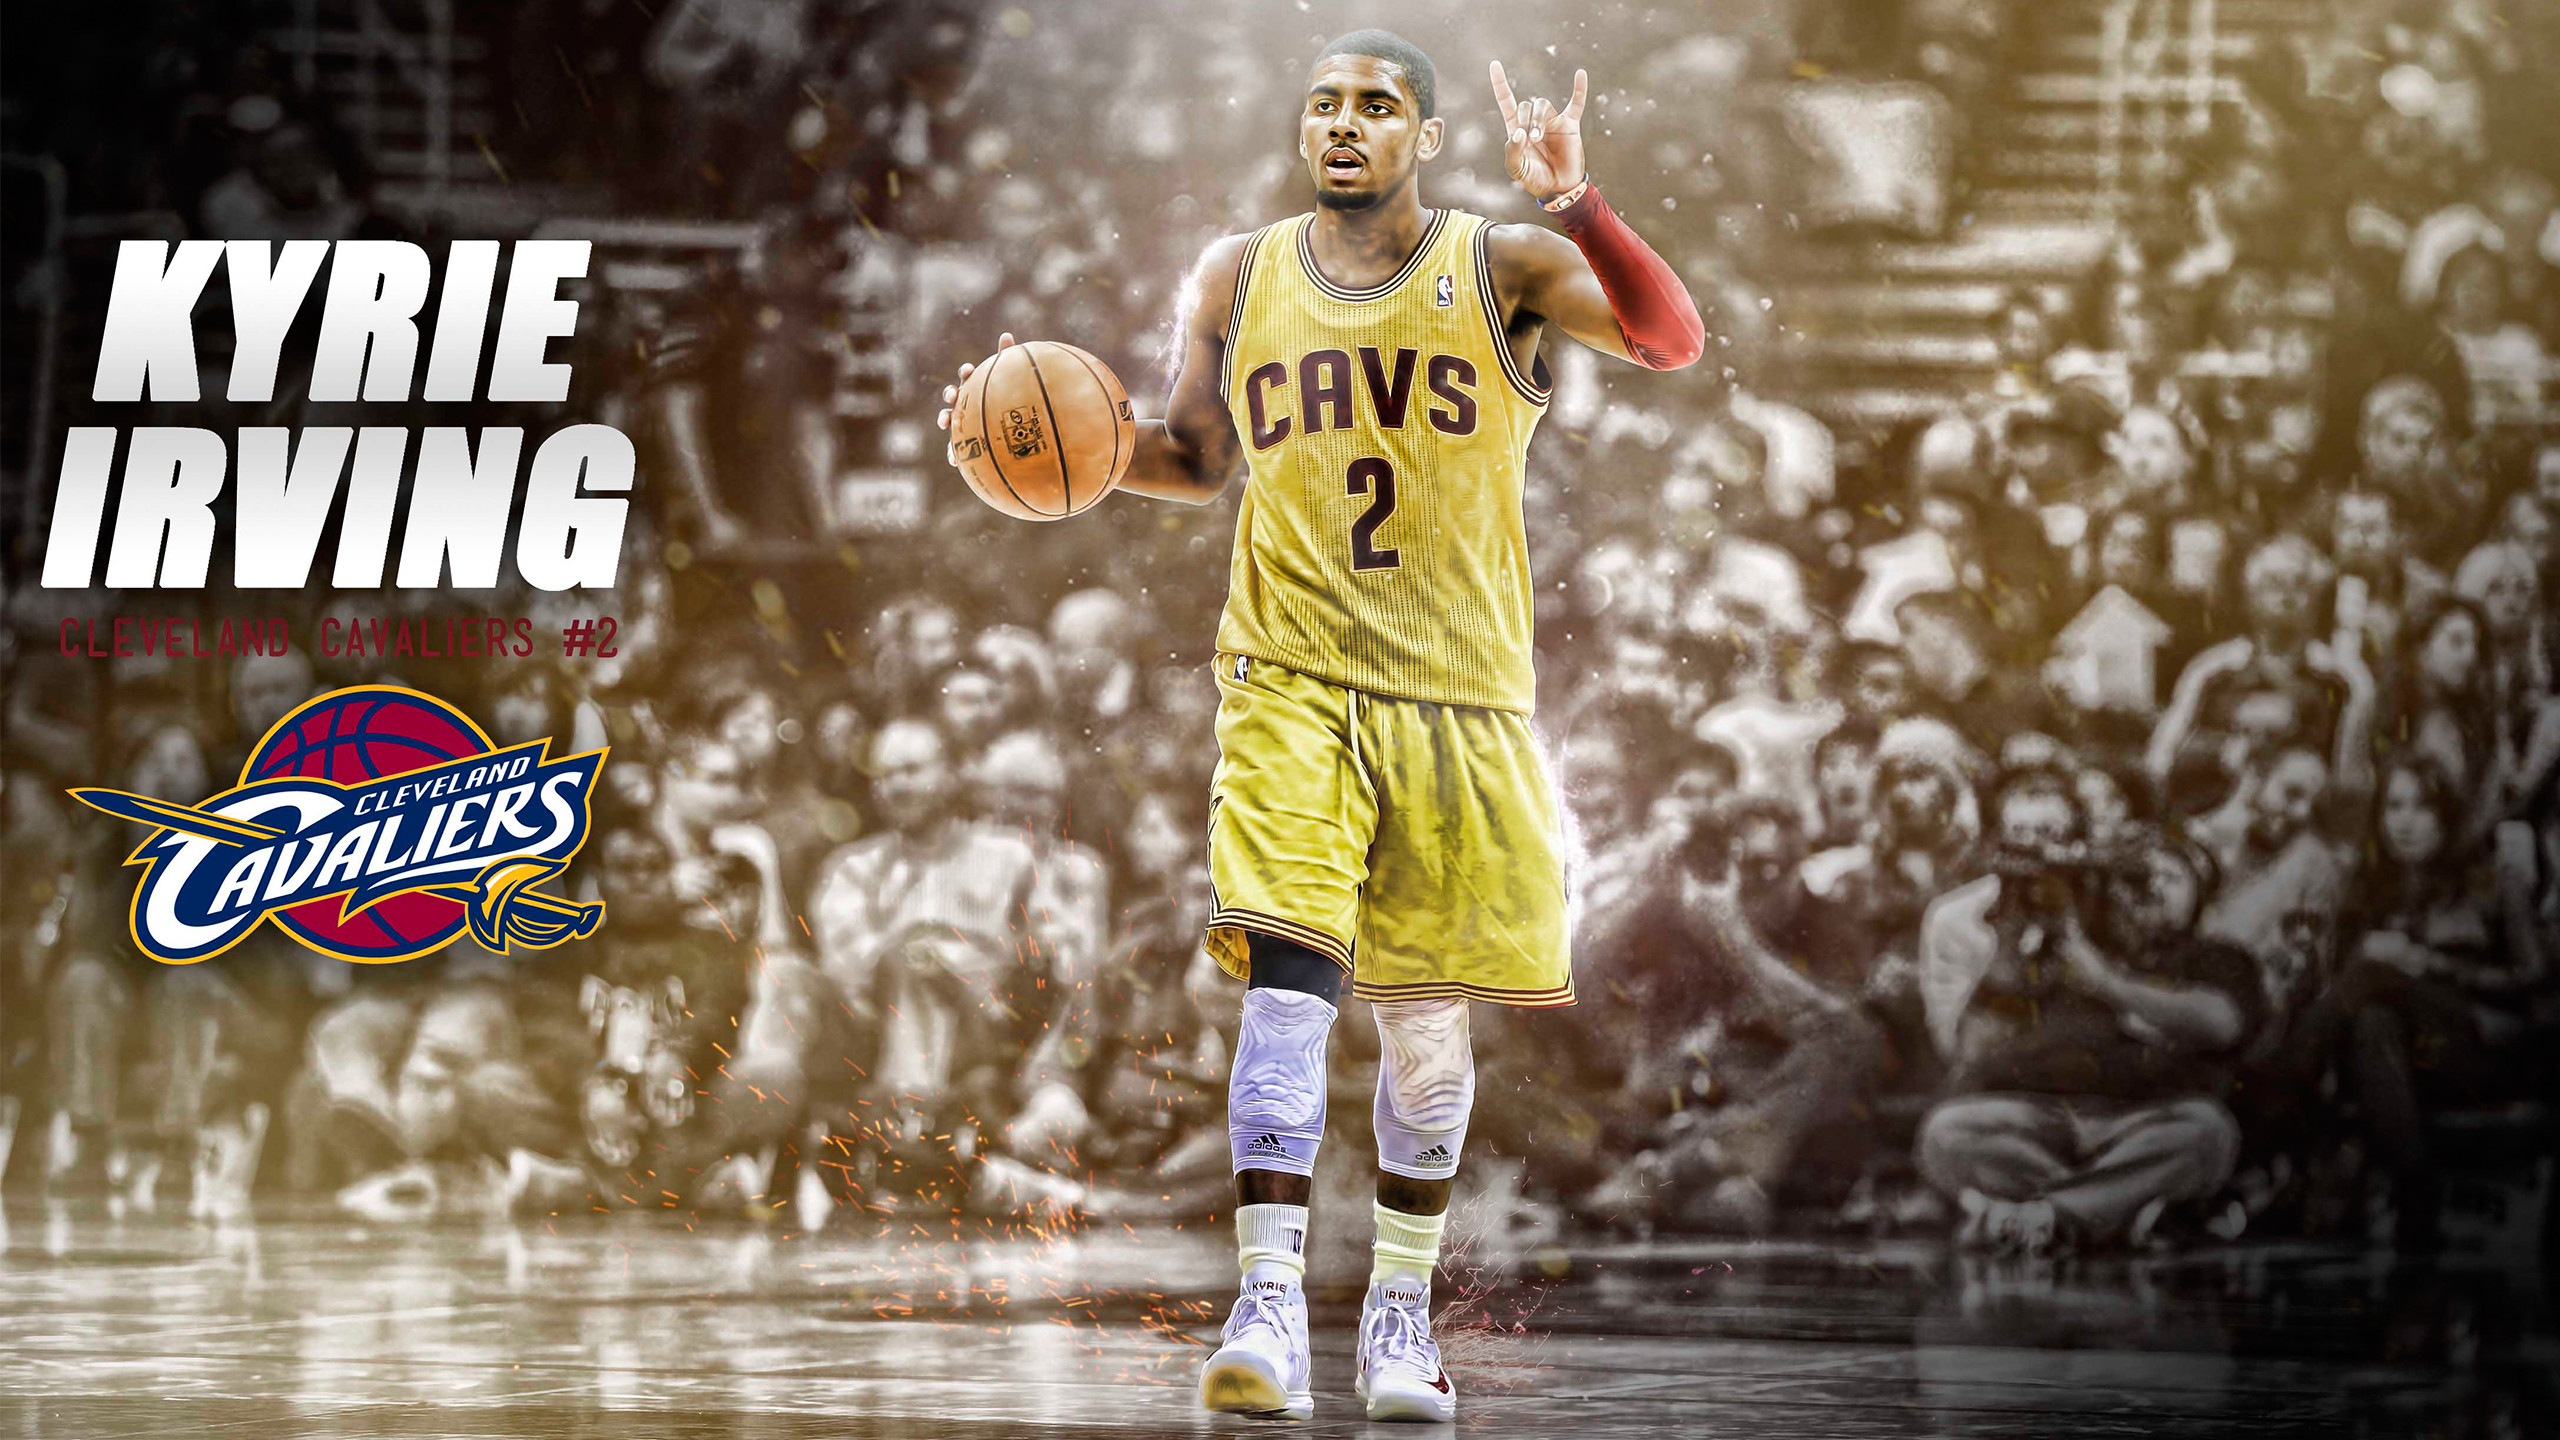 Kyrie Irving NBA Legends Pinterest Cleveland, Kyrie irving and NBA